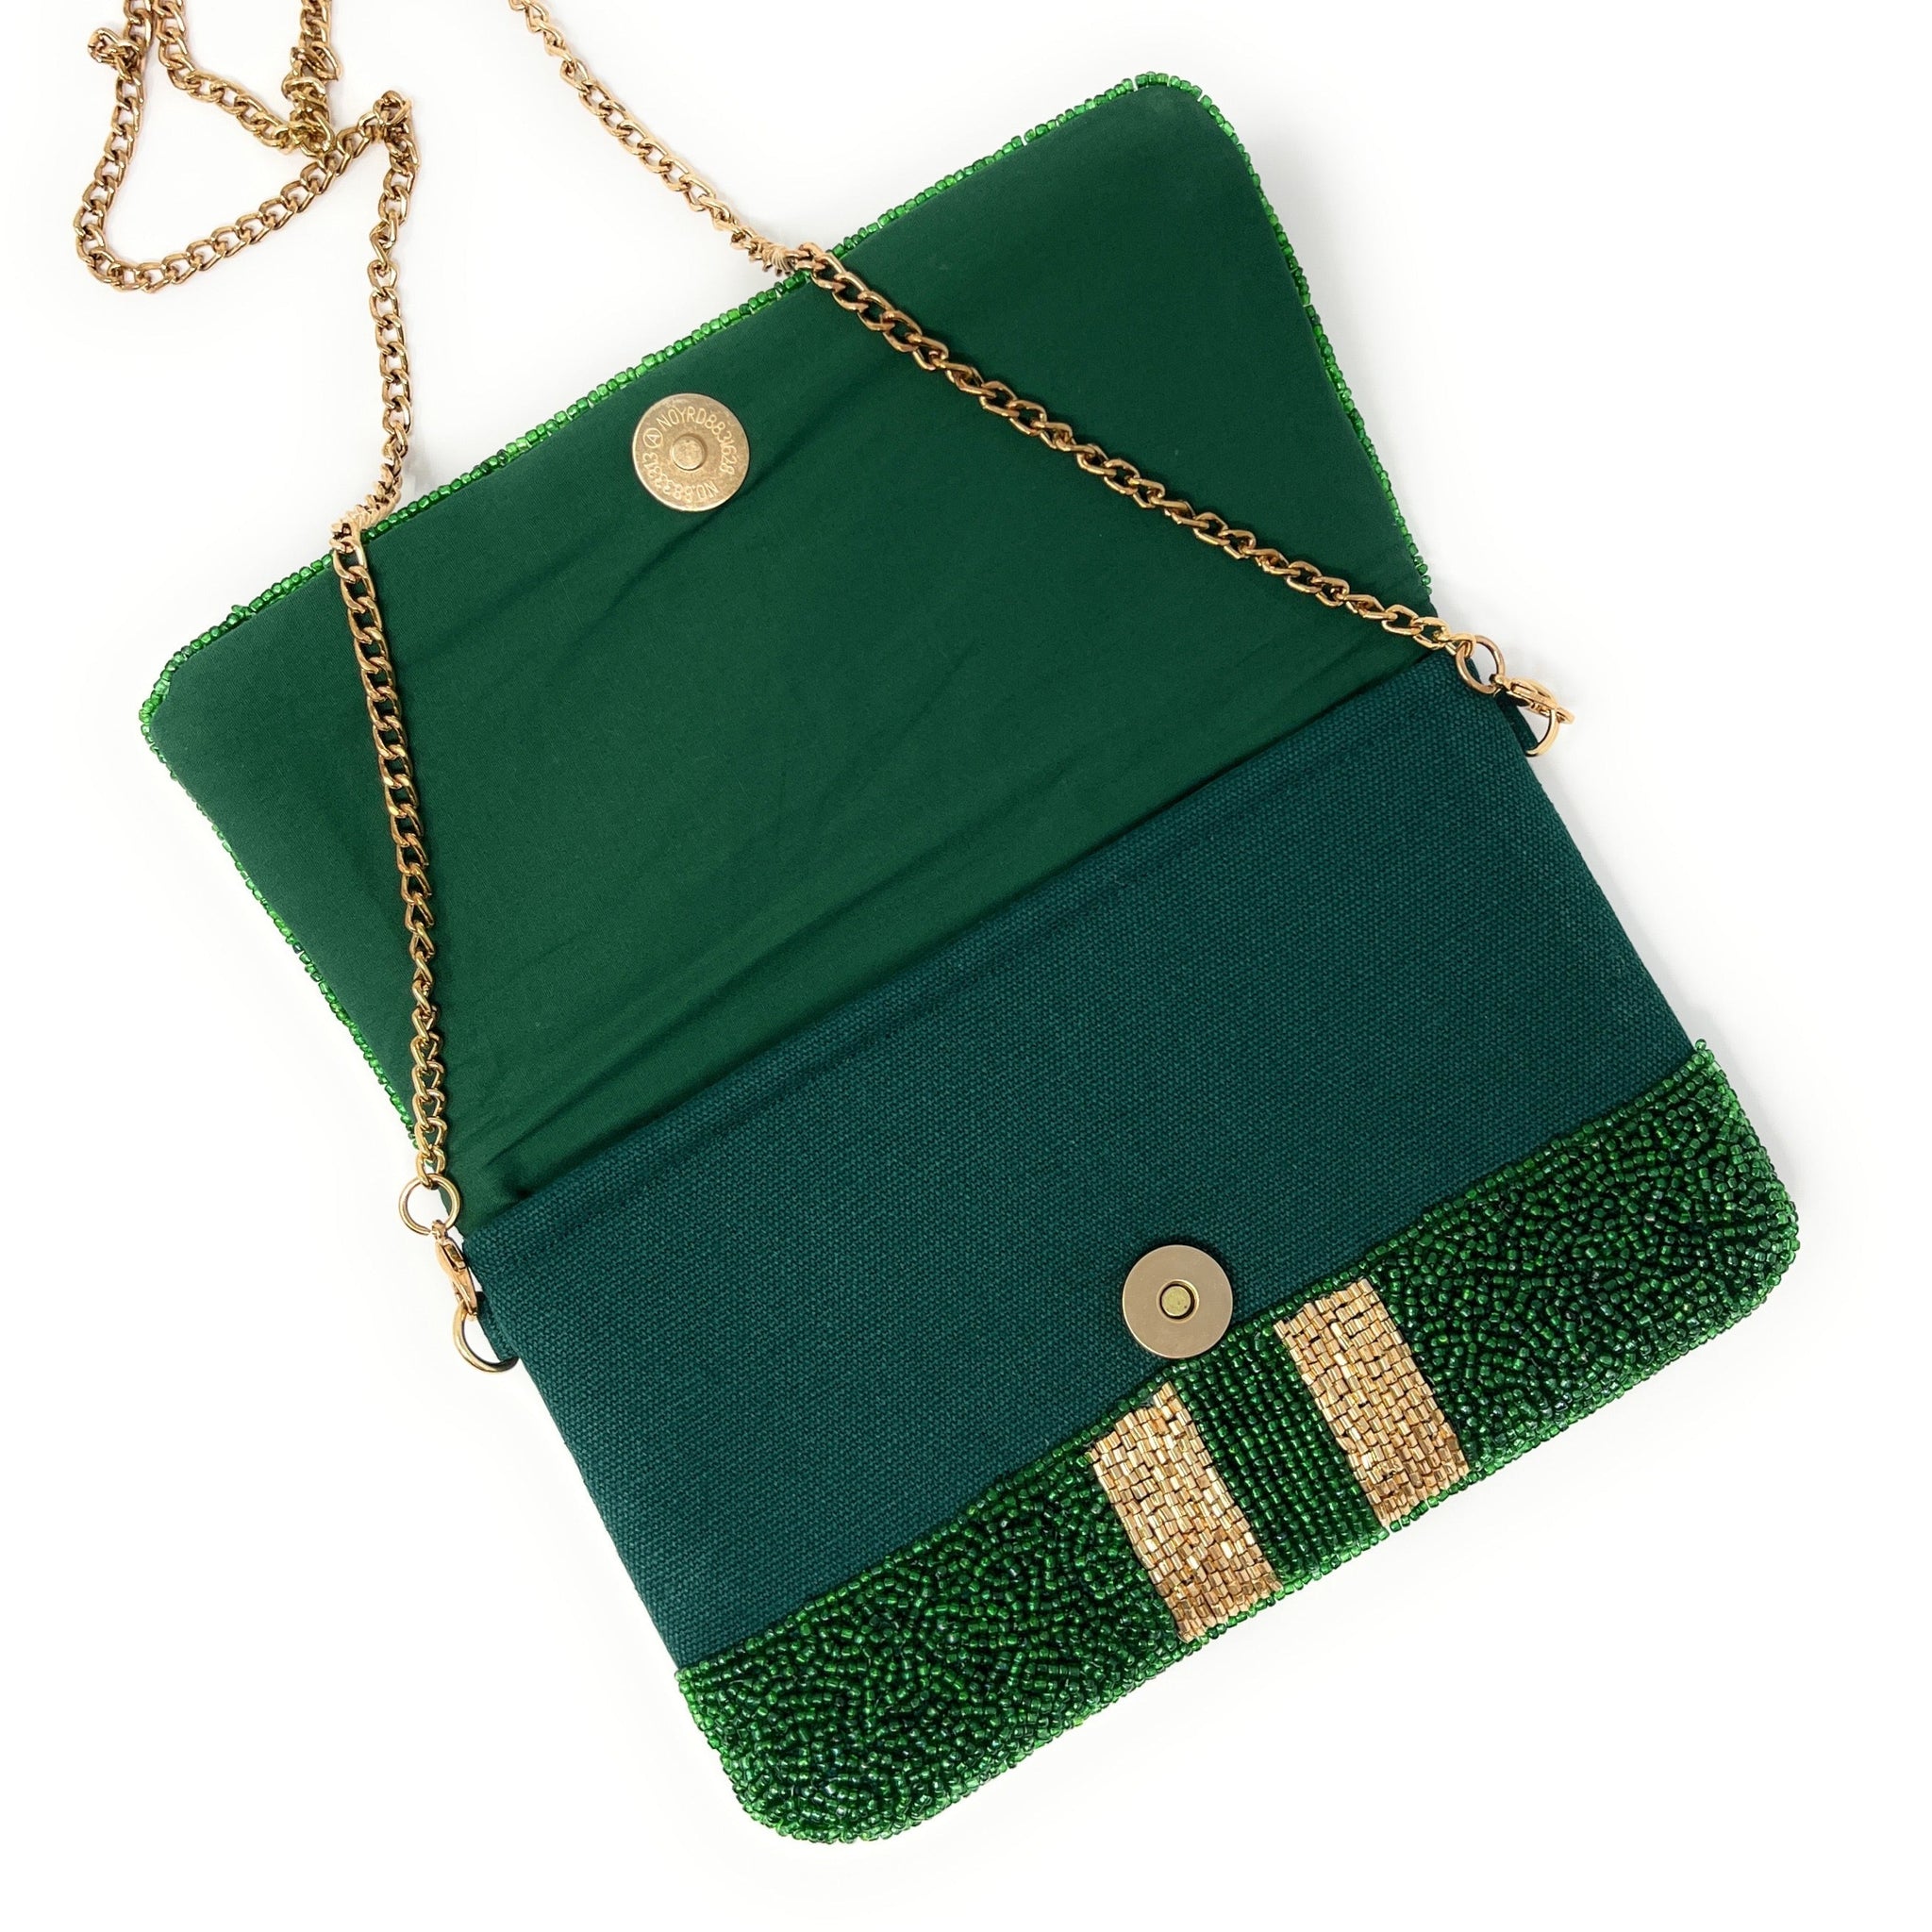 Green Box Clutch Envelope Rhinestone Evening Hand Purse for Party |  Baginning